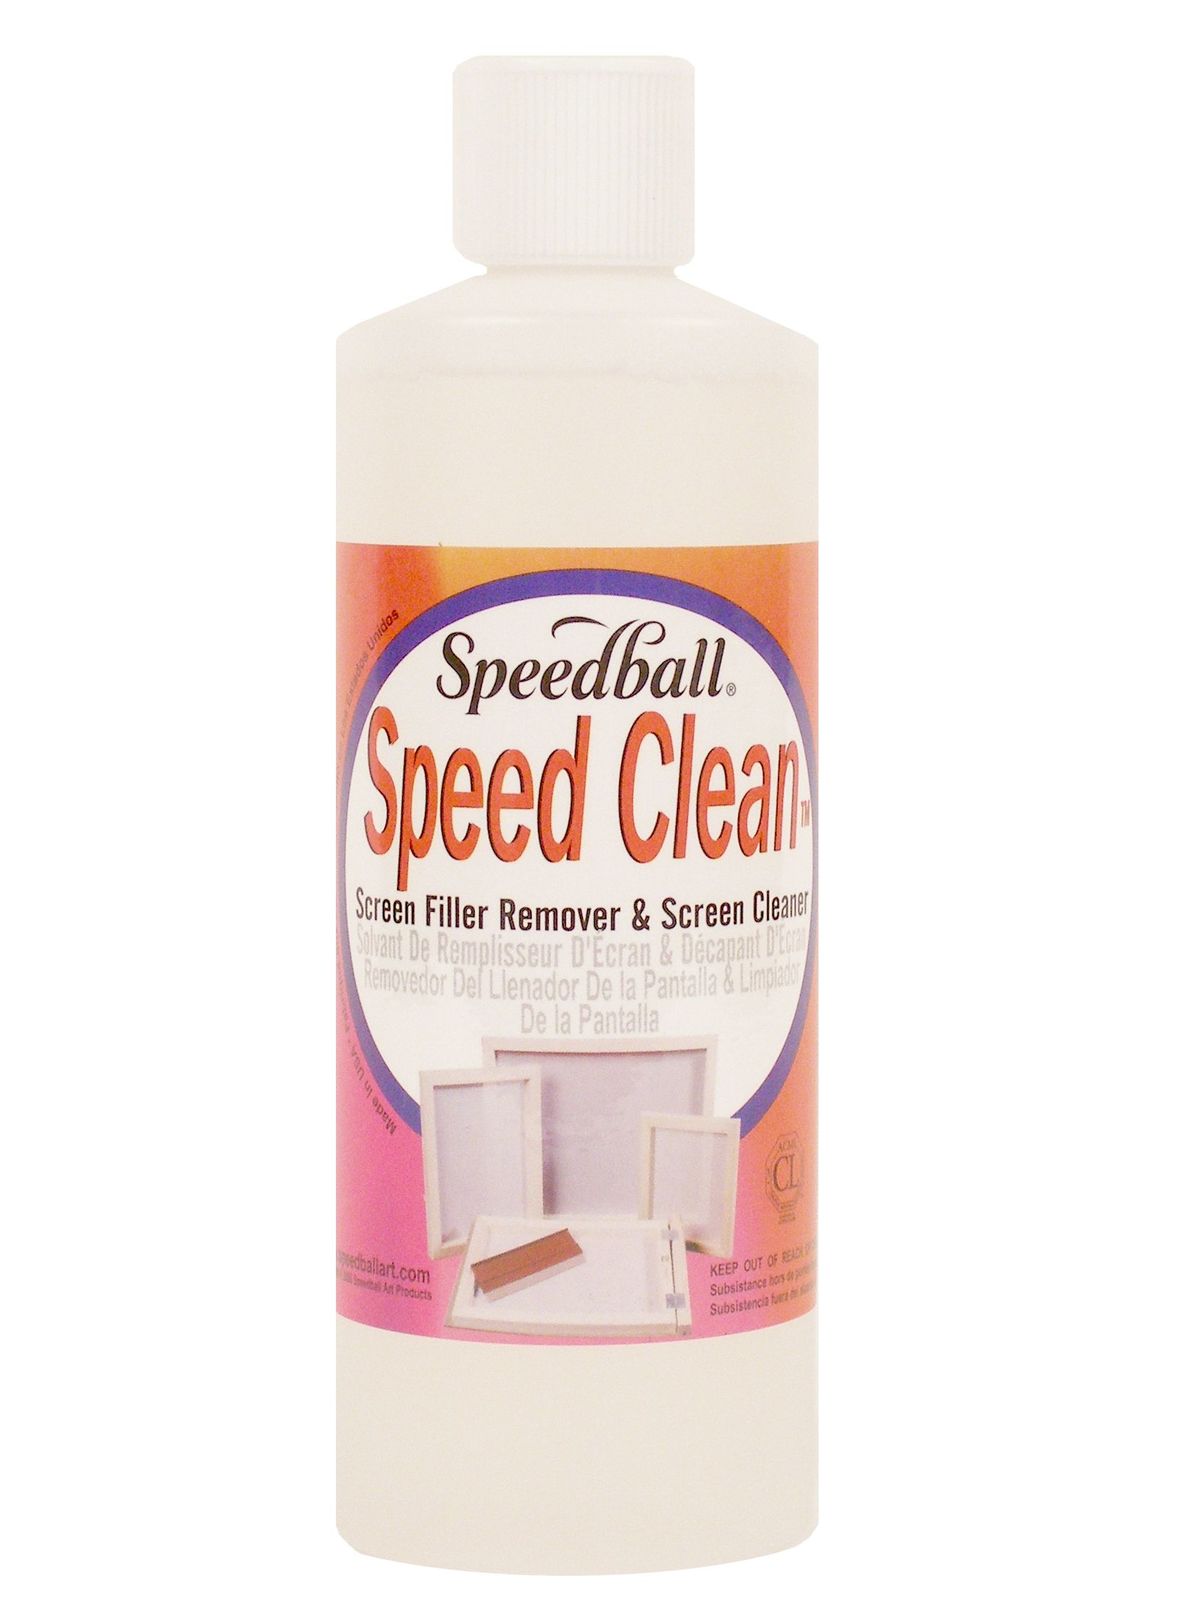 Speed Clean Screen Filler Removal & Screen Cleaner 16 Oz.